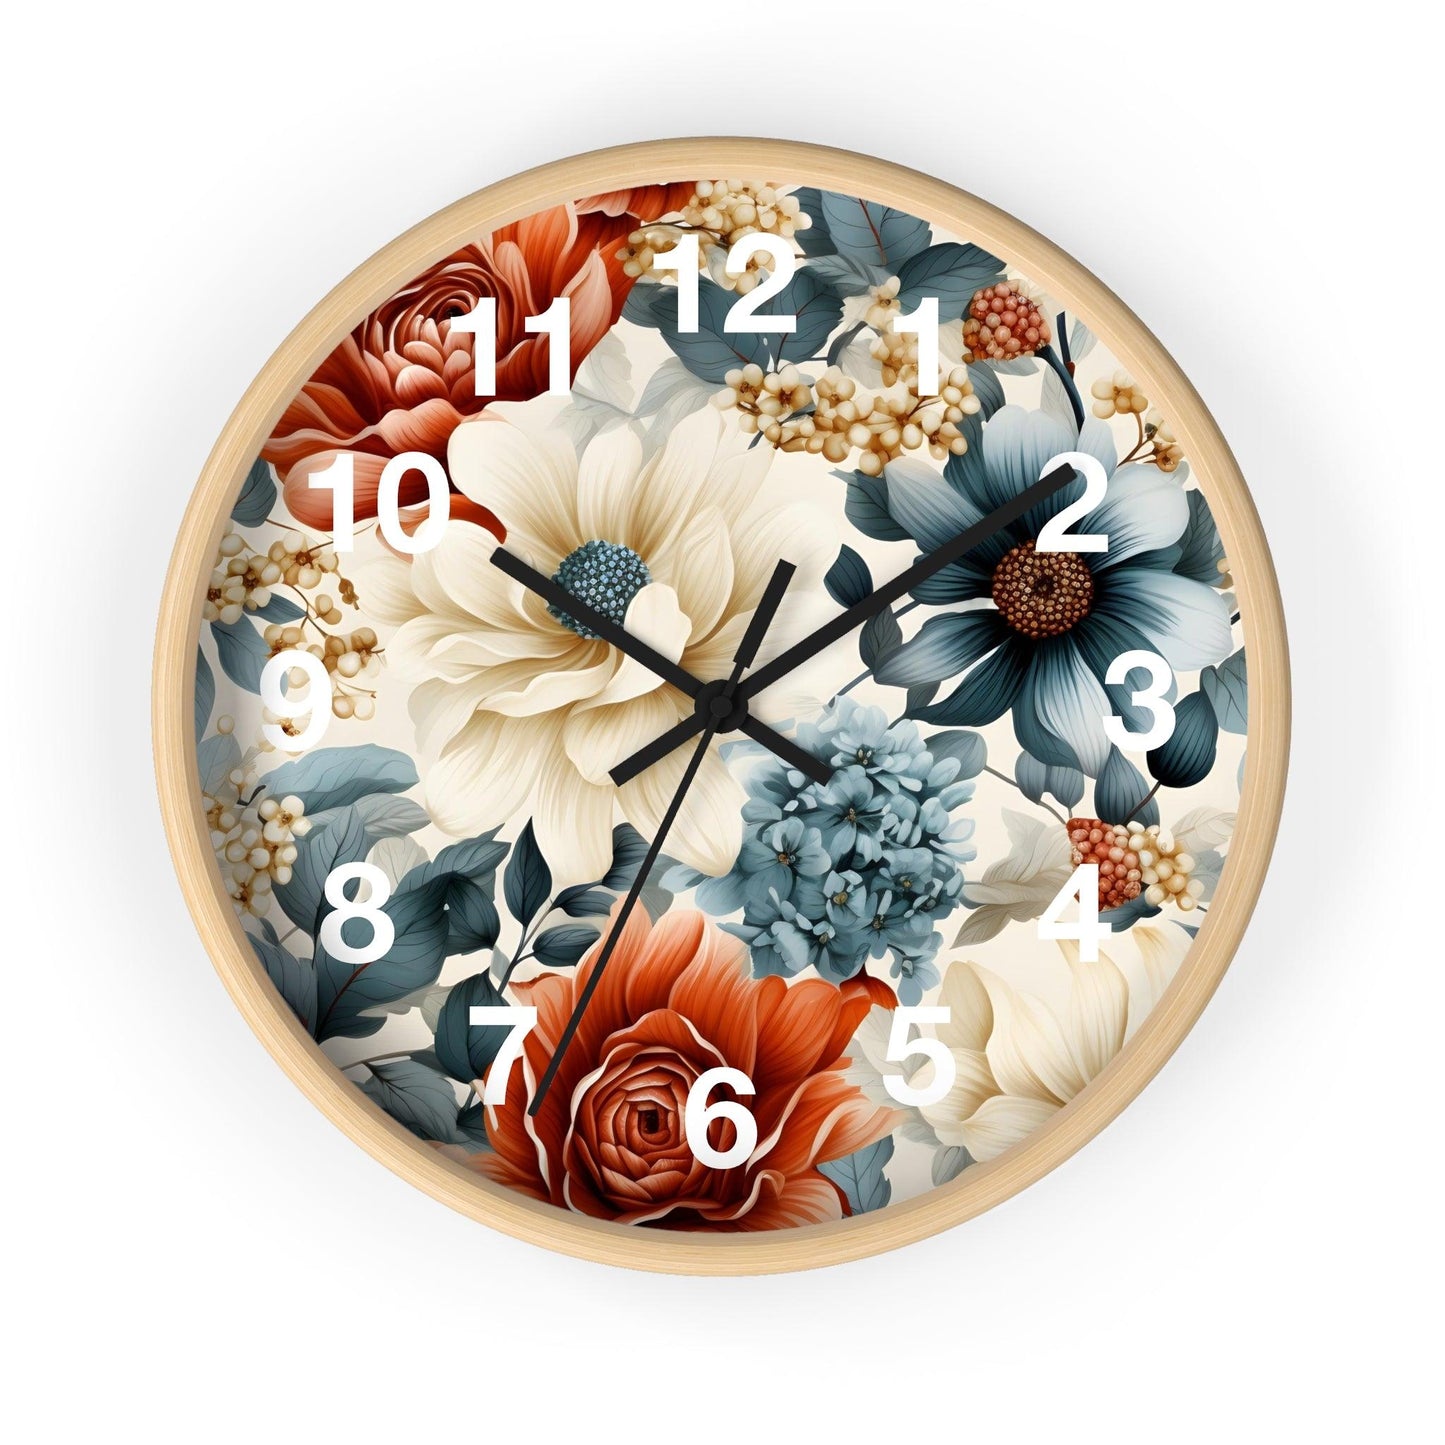 Wild Flower Wall Clock Floral Wall Clock Kids Room Home Decor New Home Gift House Warming Gift for New Home Owner, Dorm Room Clock Collage Student Clock